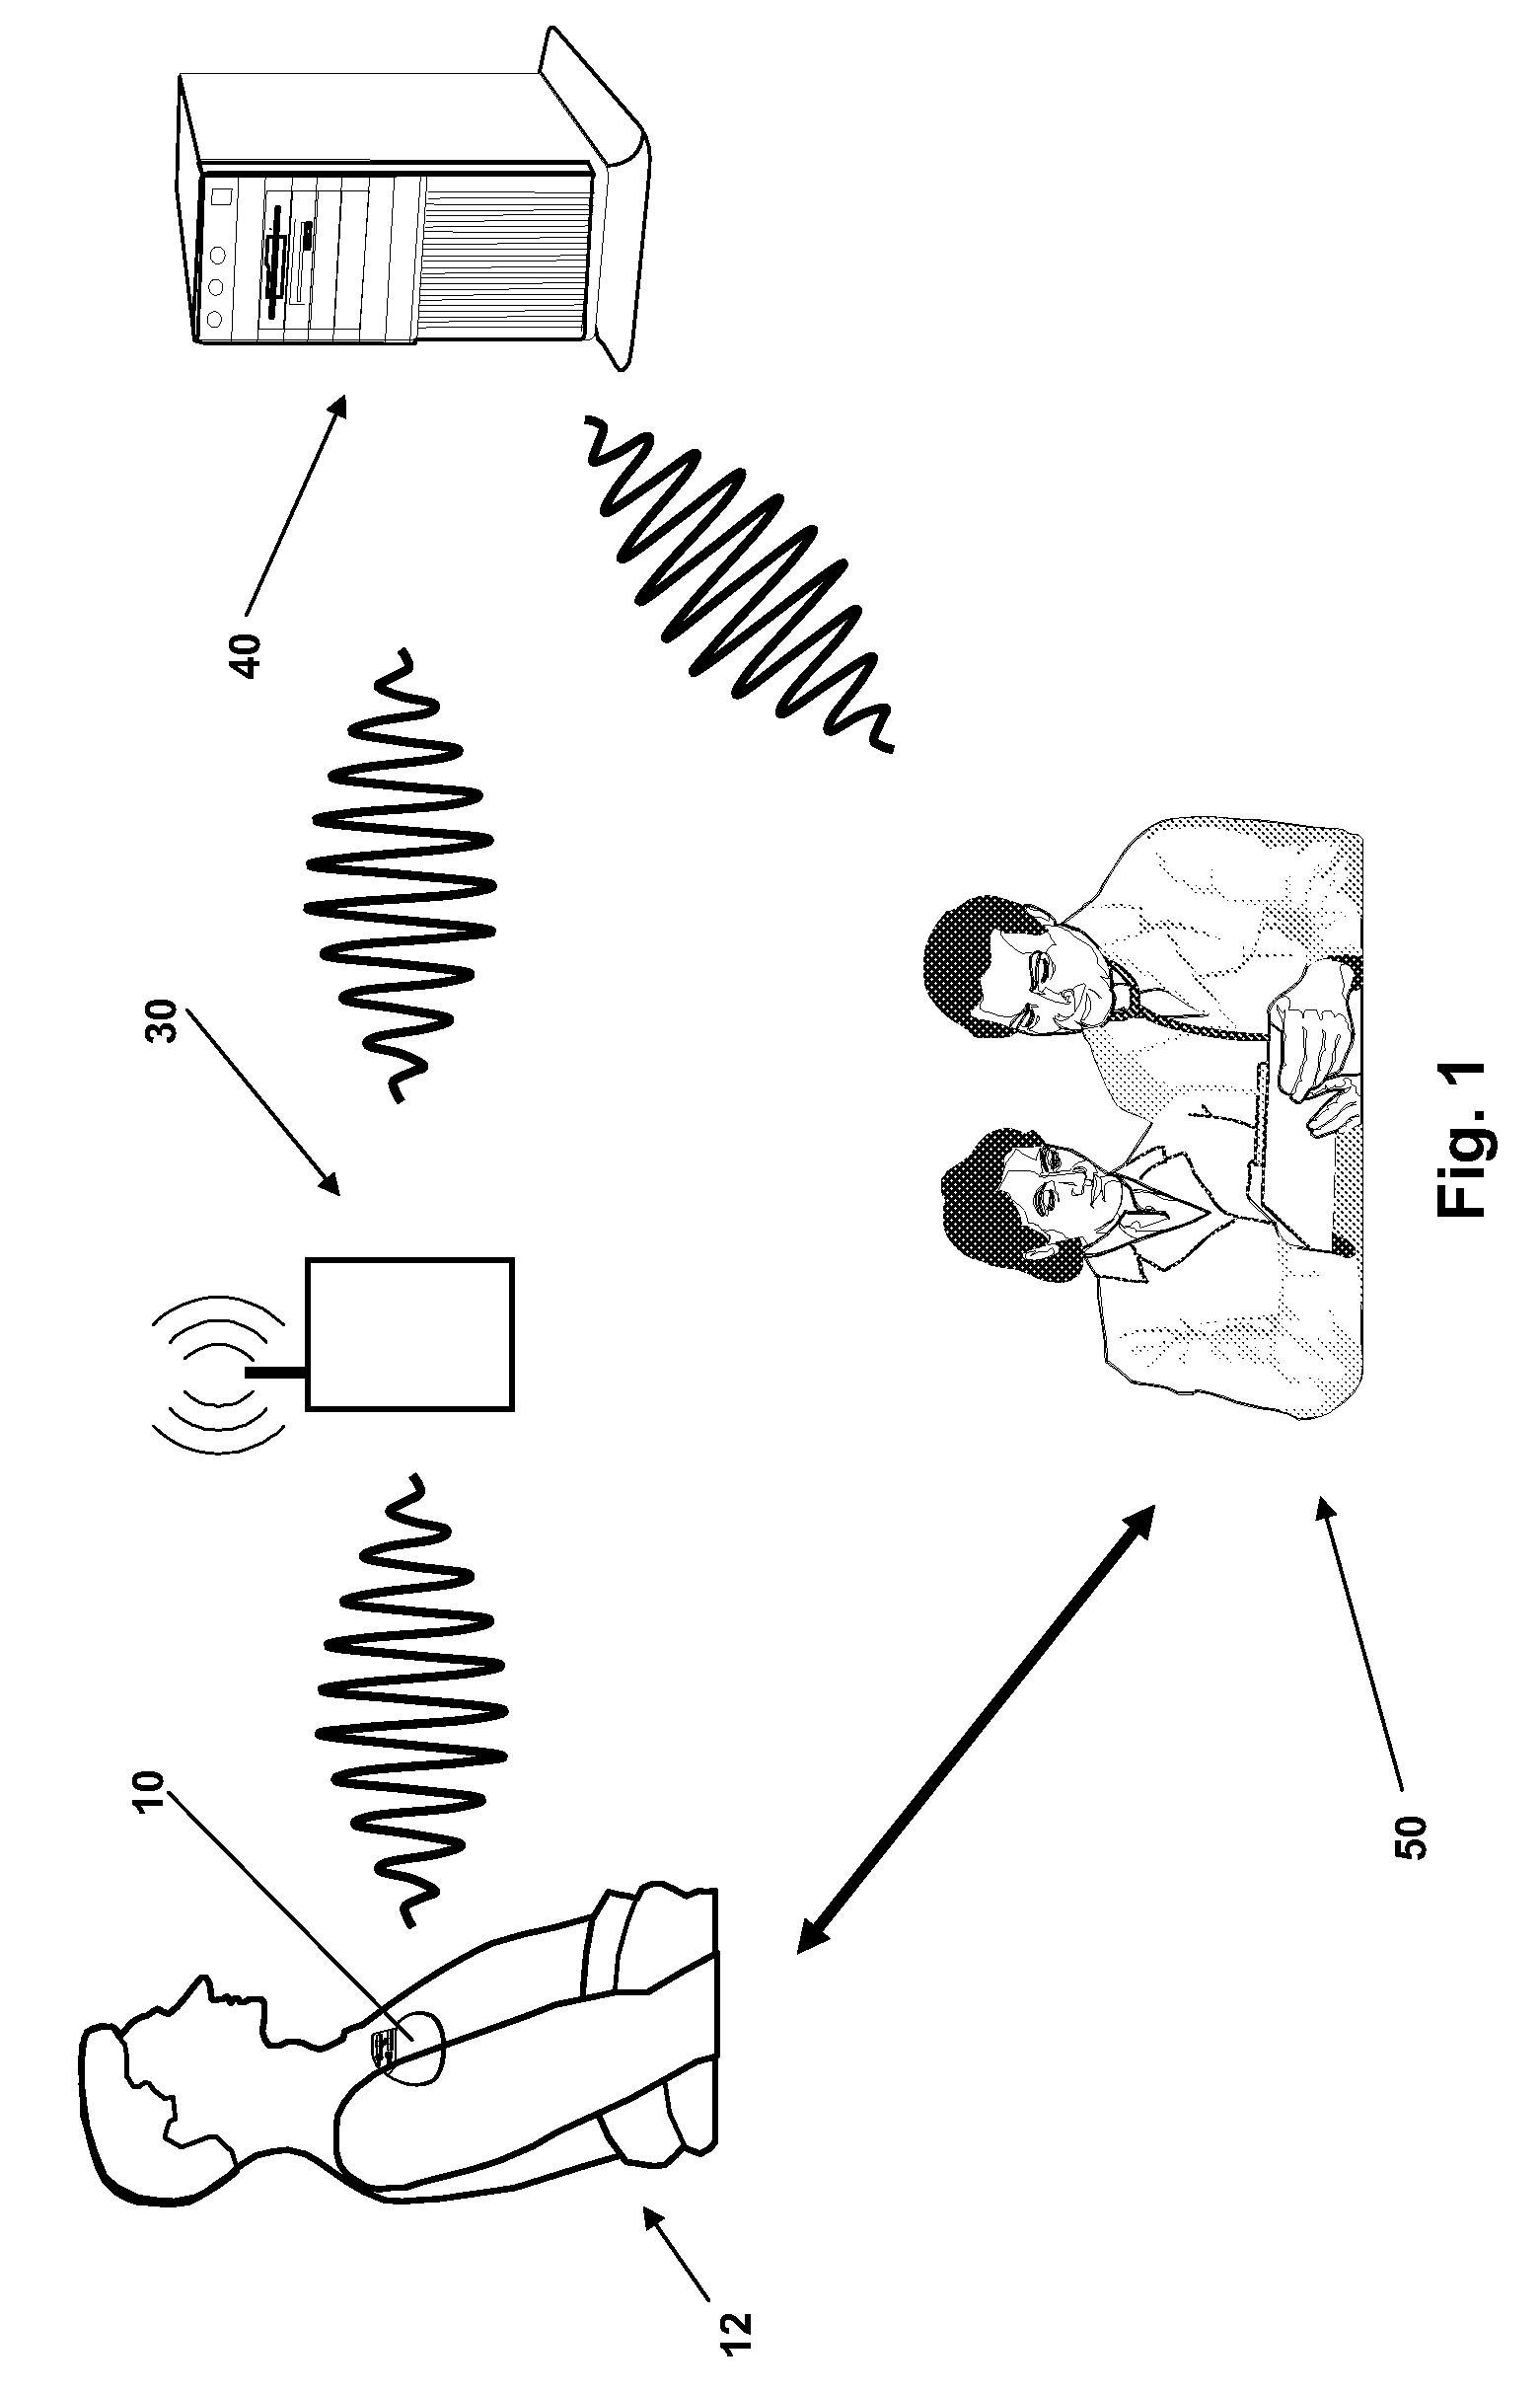 Therapeutic unit and therapeutic system supporting a follow-up examination